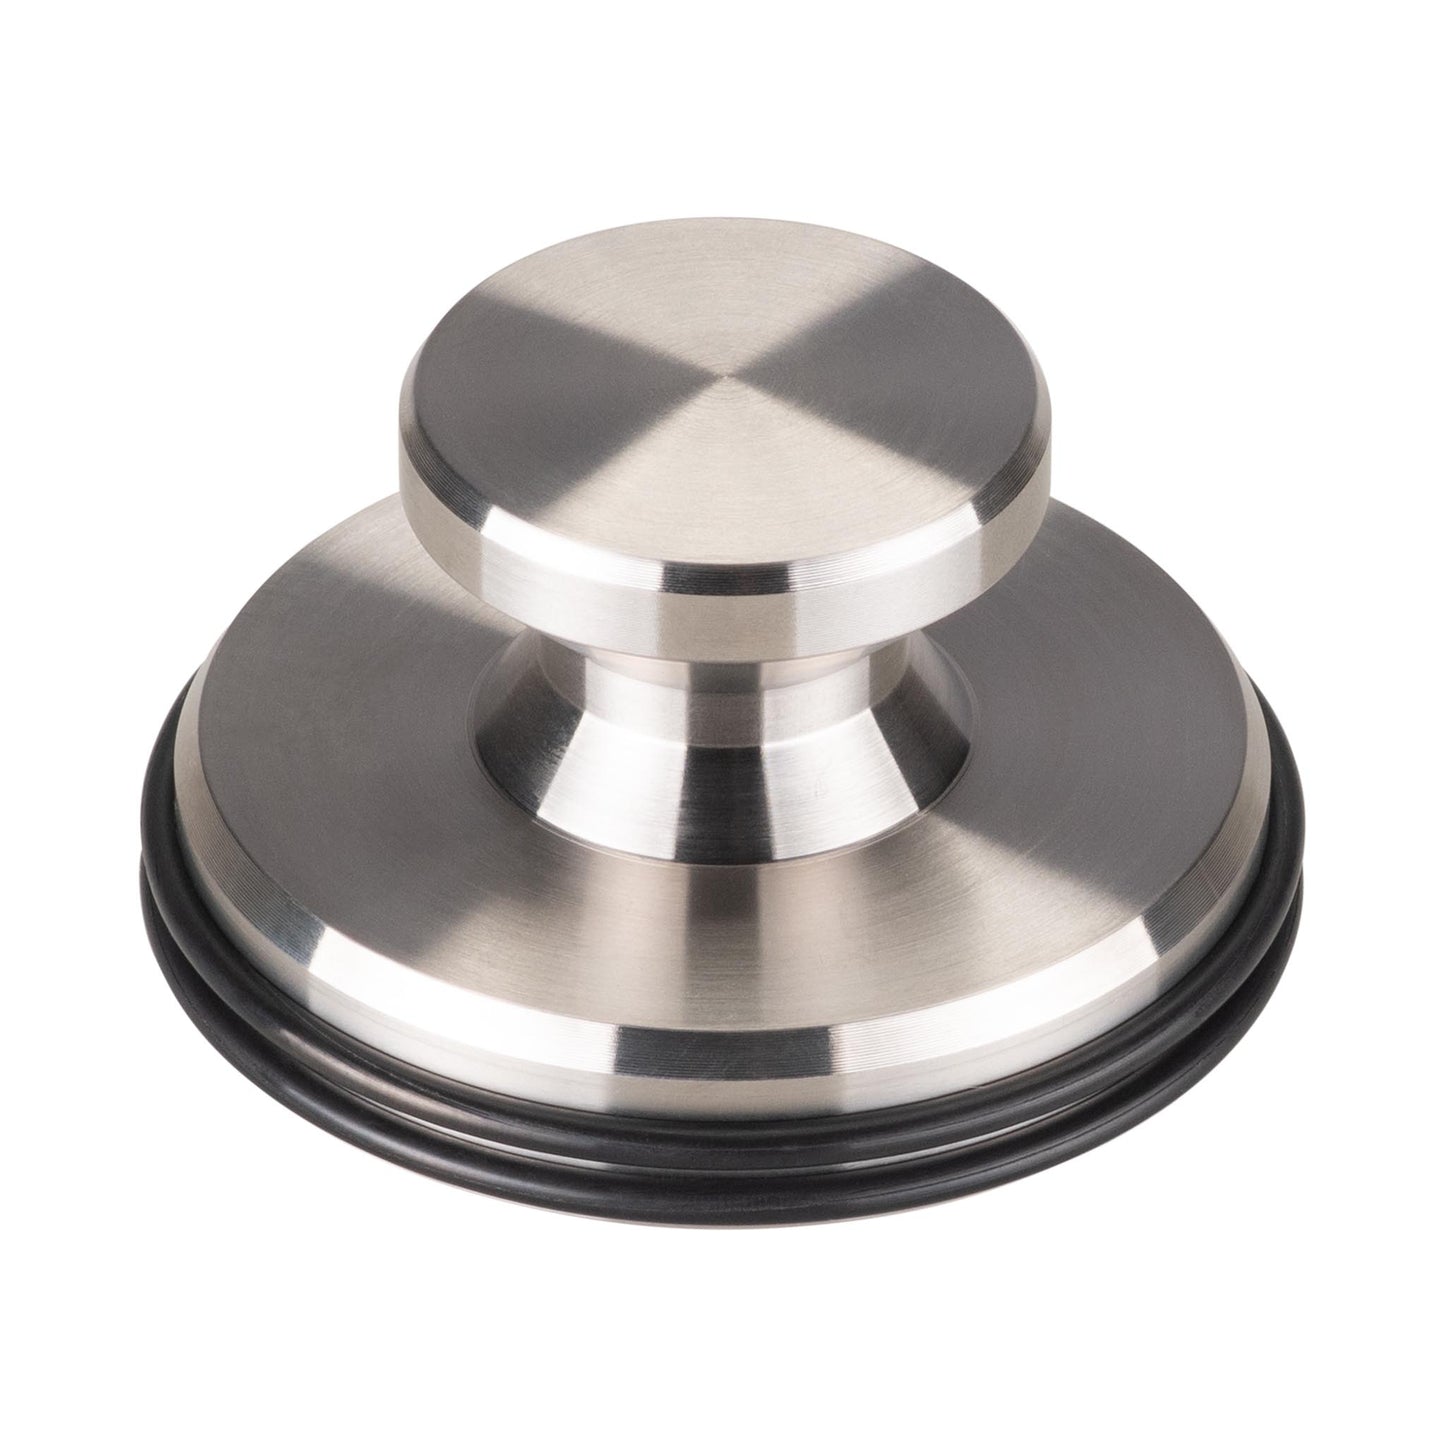 VPI HR-X Stainless Steel Record Center Weight